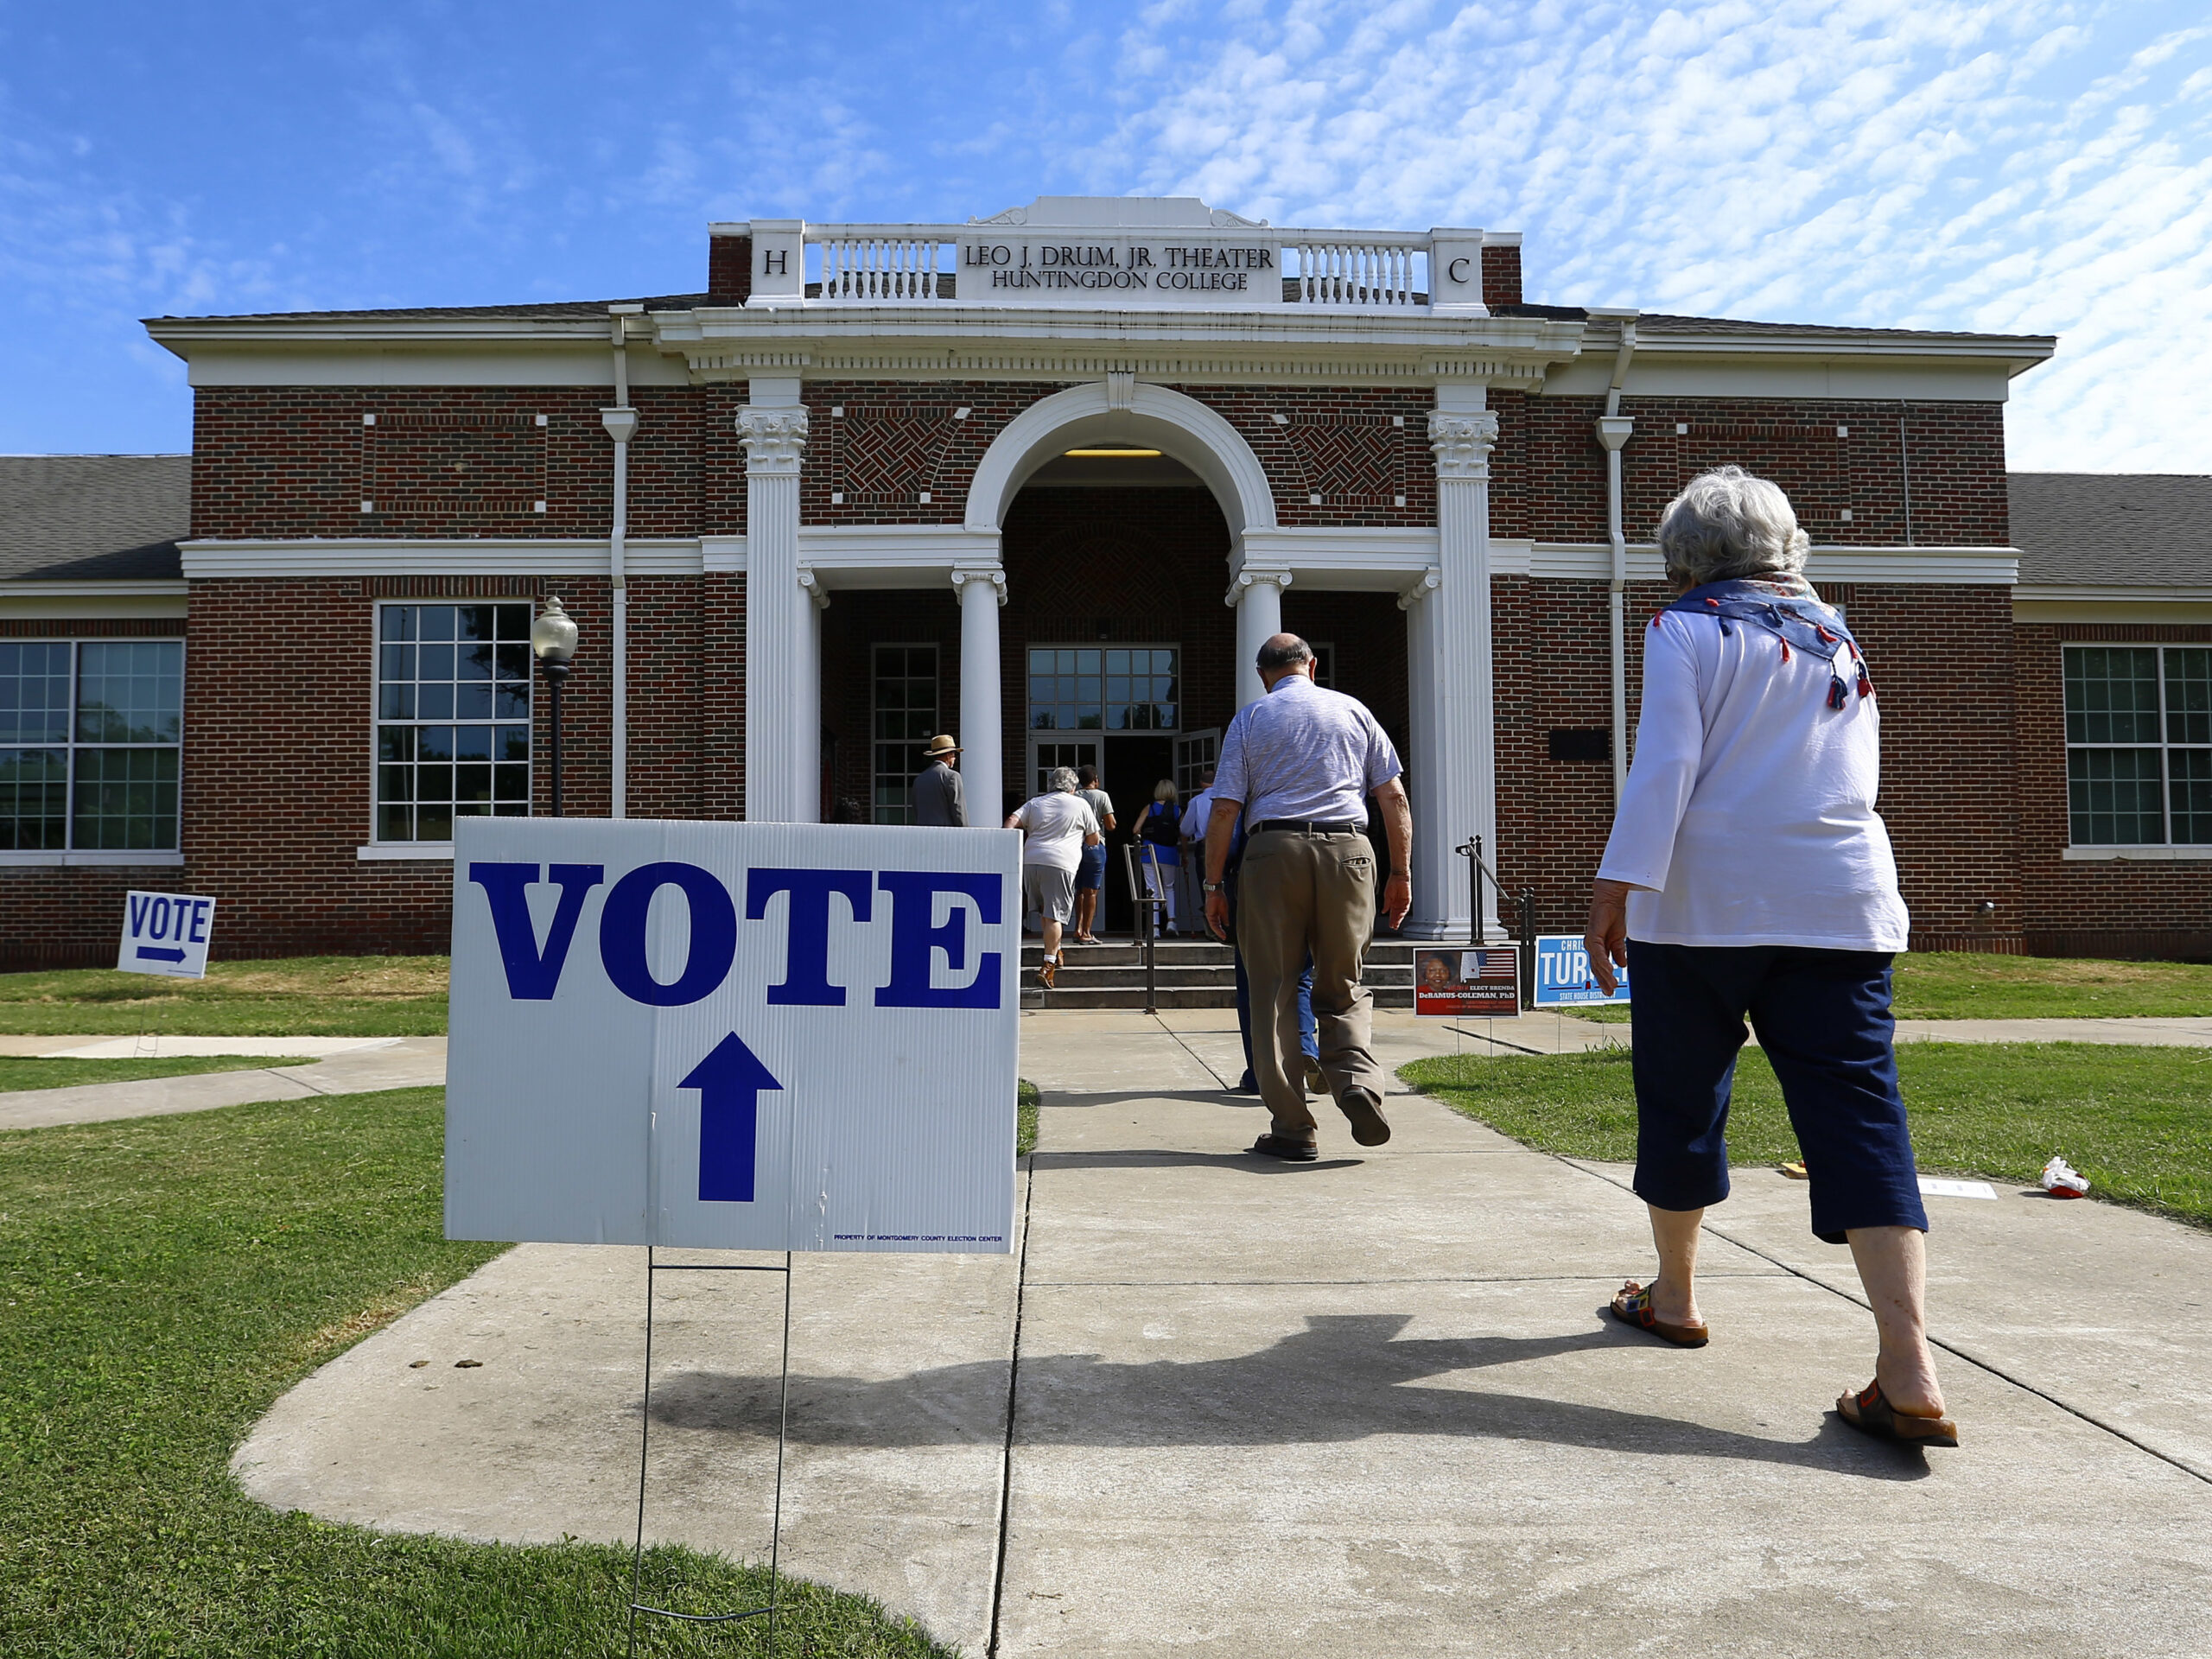 Voters head to the polls in Alabama's newly drawn 2nd Congressional District on Tuesday. That district includes Montgomery, Ala., seen here on June 5, 2018.